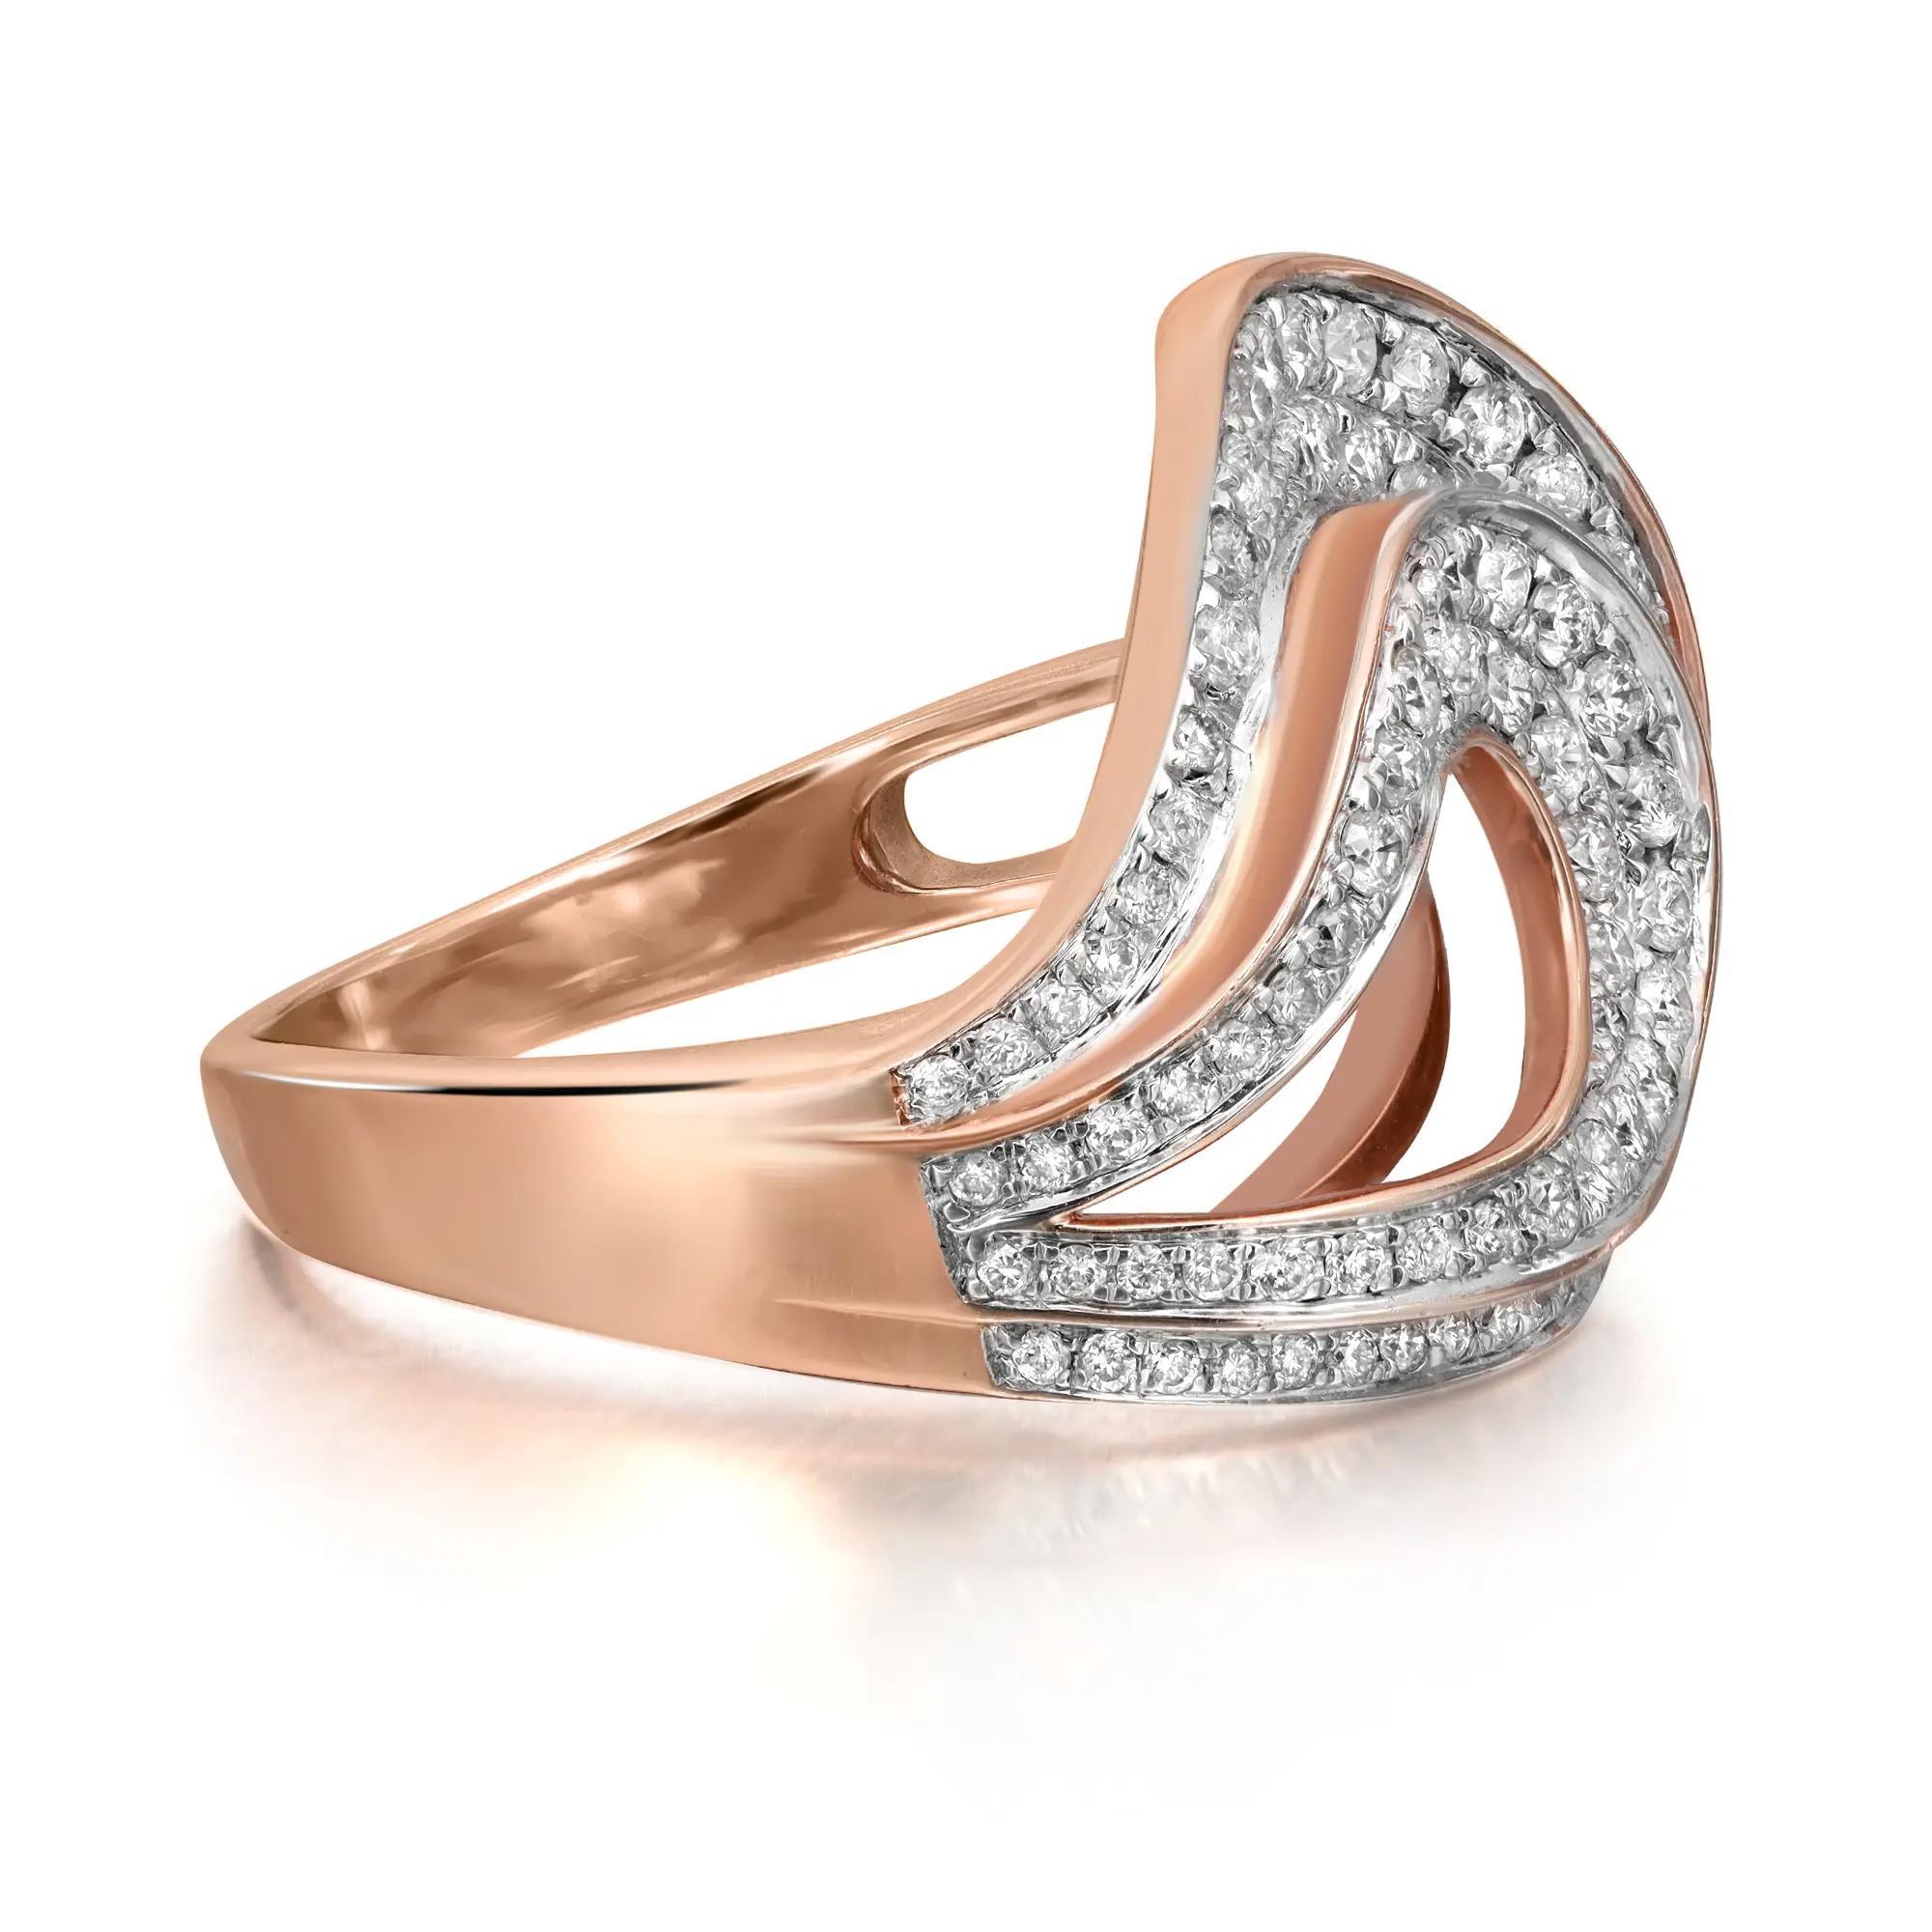 This stunning ladies cocktail ring is a perfect fit for any occasion. Crafted in 14K rose gold. It features pave set round cut diamonds weighing 0.96 carat. Diamond quality: Color H-I and clarity SI1. Ring size 7.5. Total weight: 7.73 grams. Comes